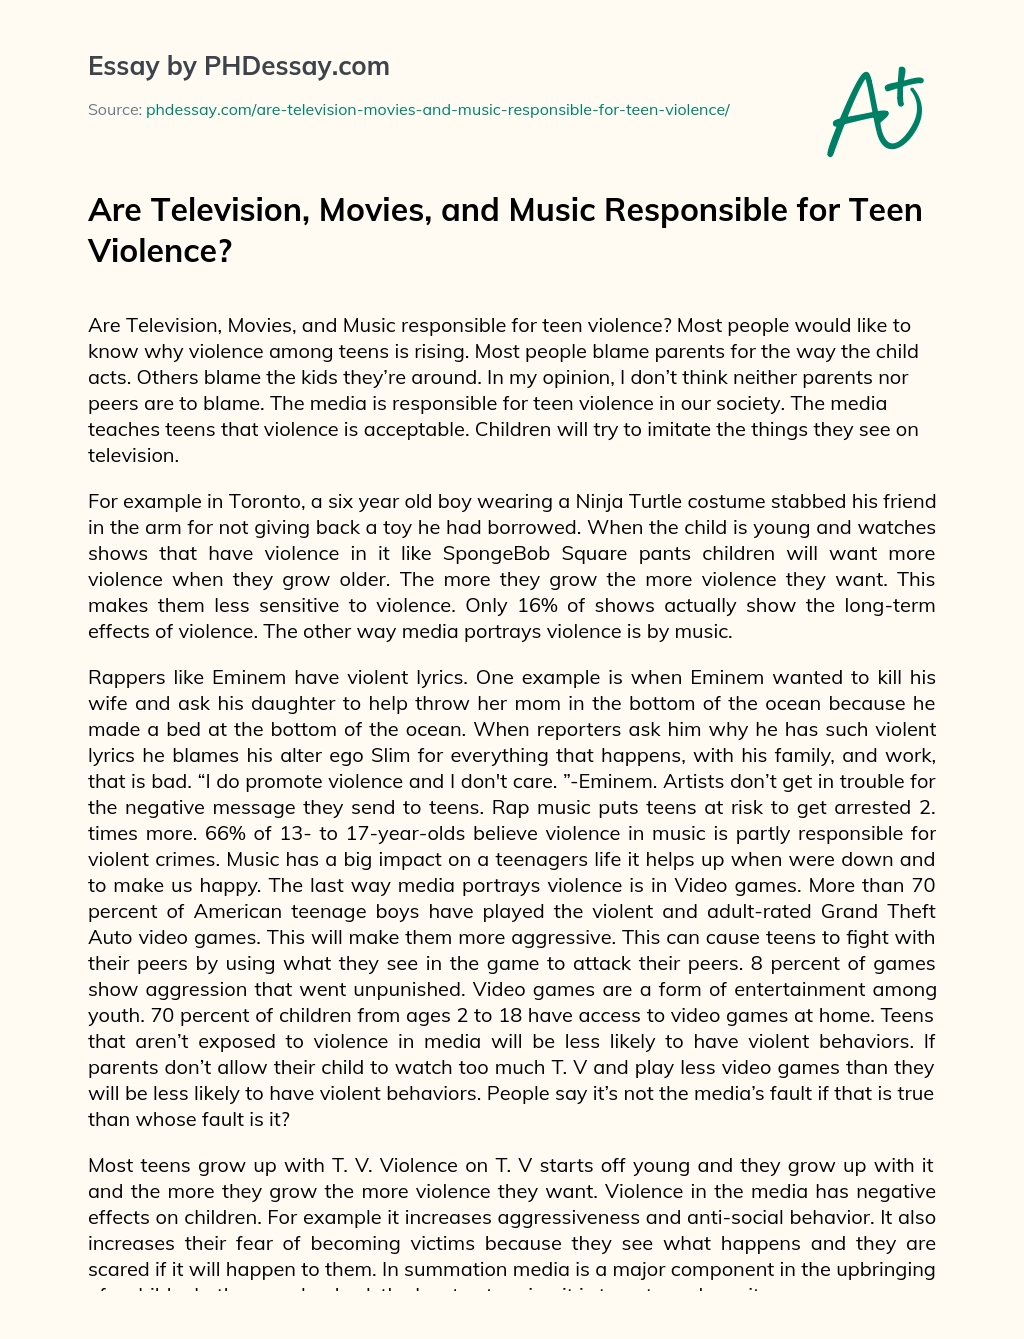 Are Television, Movies, and Music Responsible for Teen Violence? essay